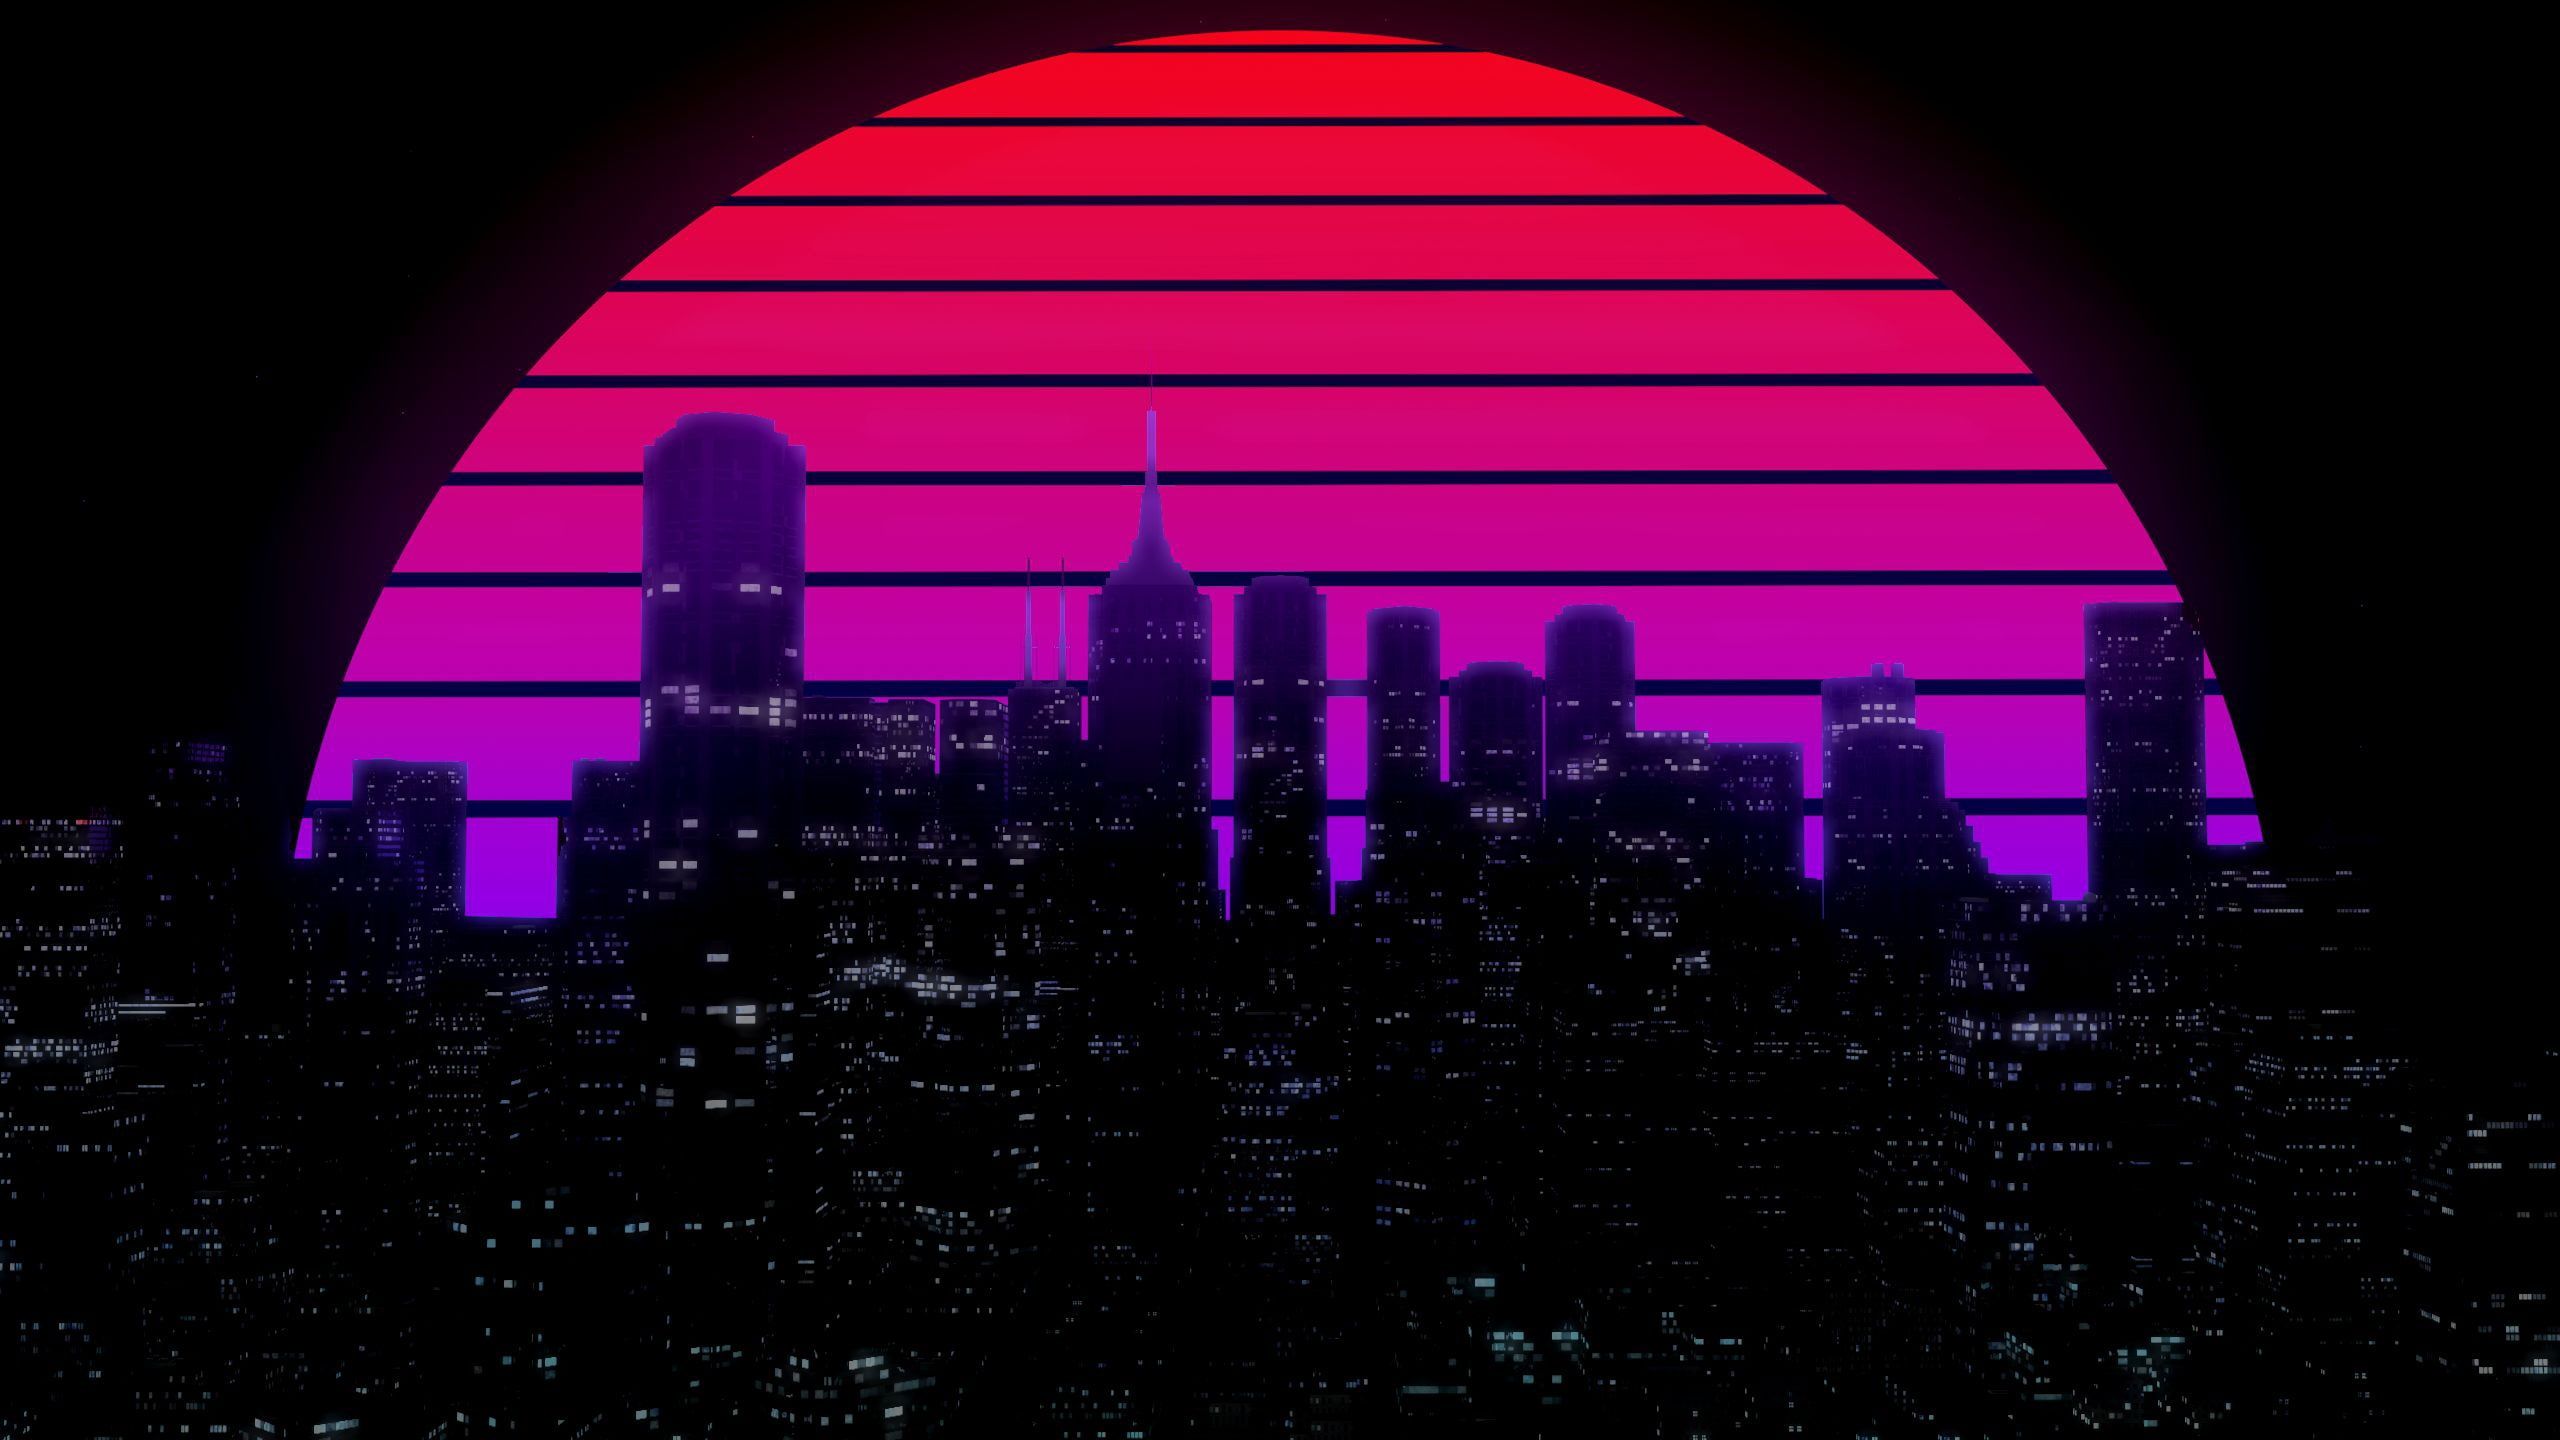 The sun #Night #Music The city #Star #Building #Background s #Neon 's #Synth #Retrow. Cityscape wallpaper, Aesthetic desktop wallpaper, Aesthetic wallpaper